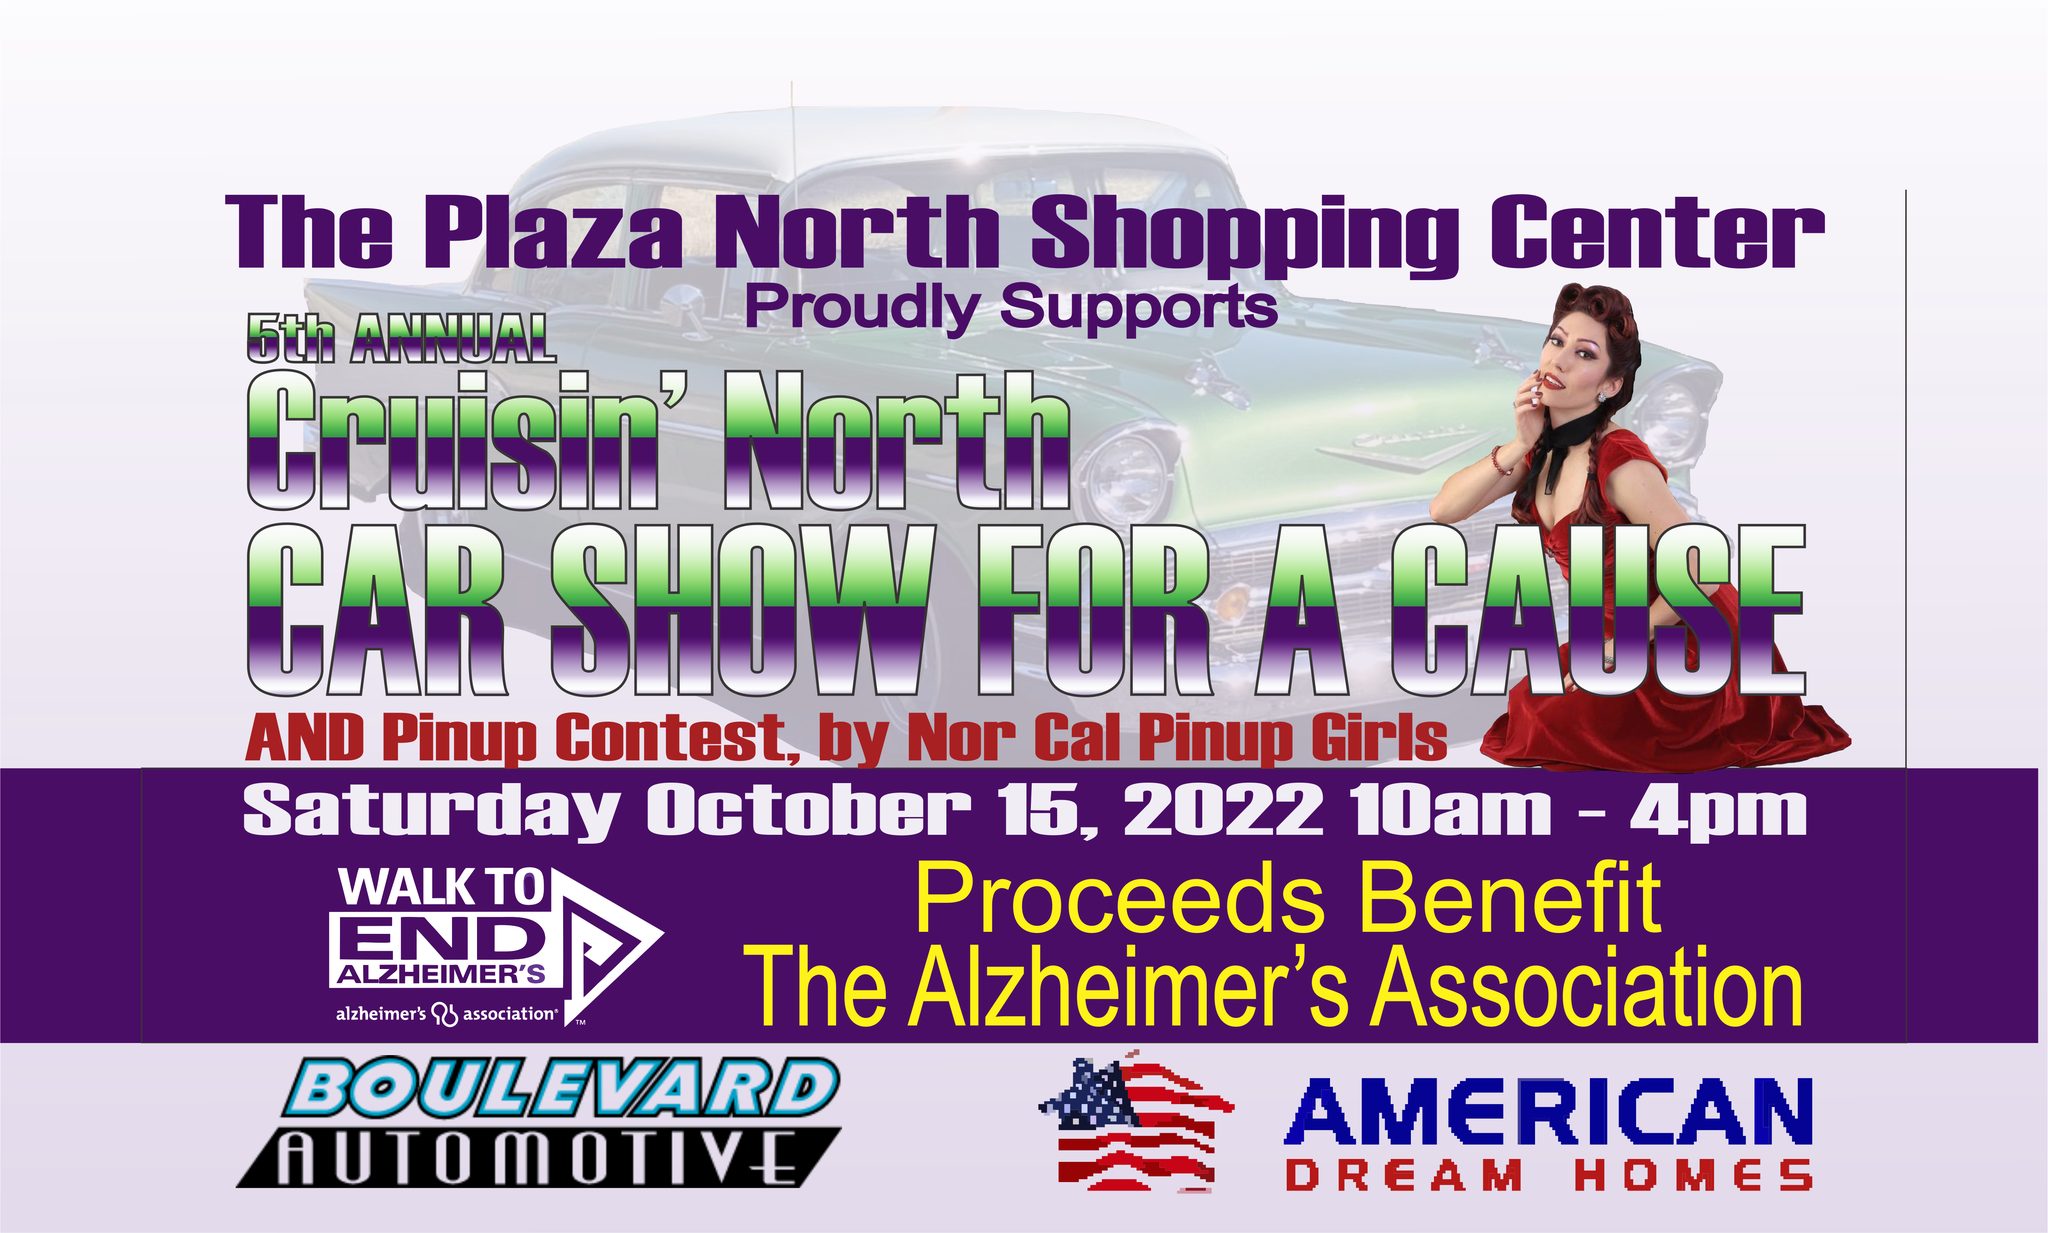 Cruisin' North Car Show for a Cause